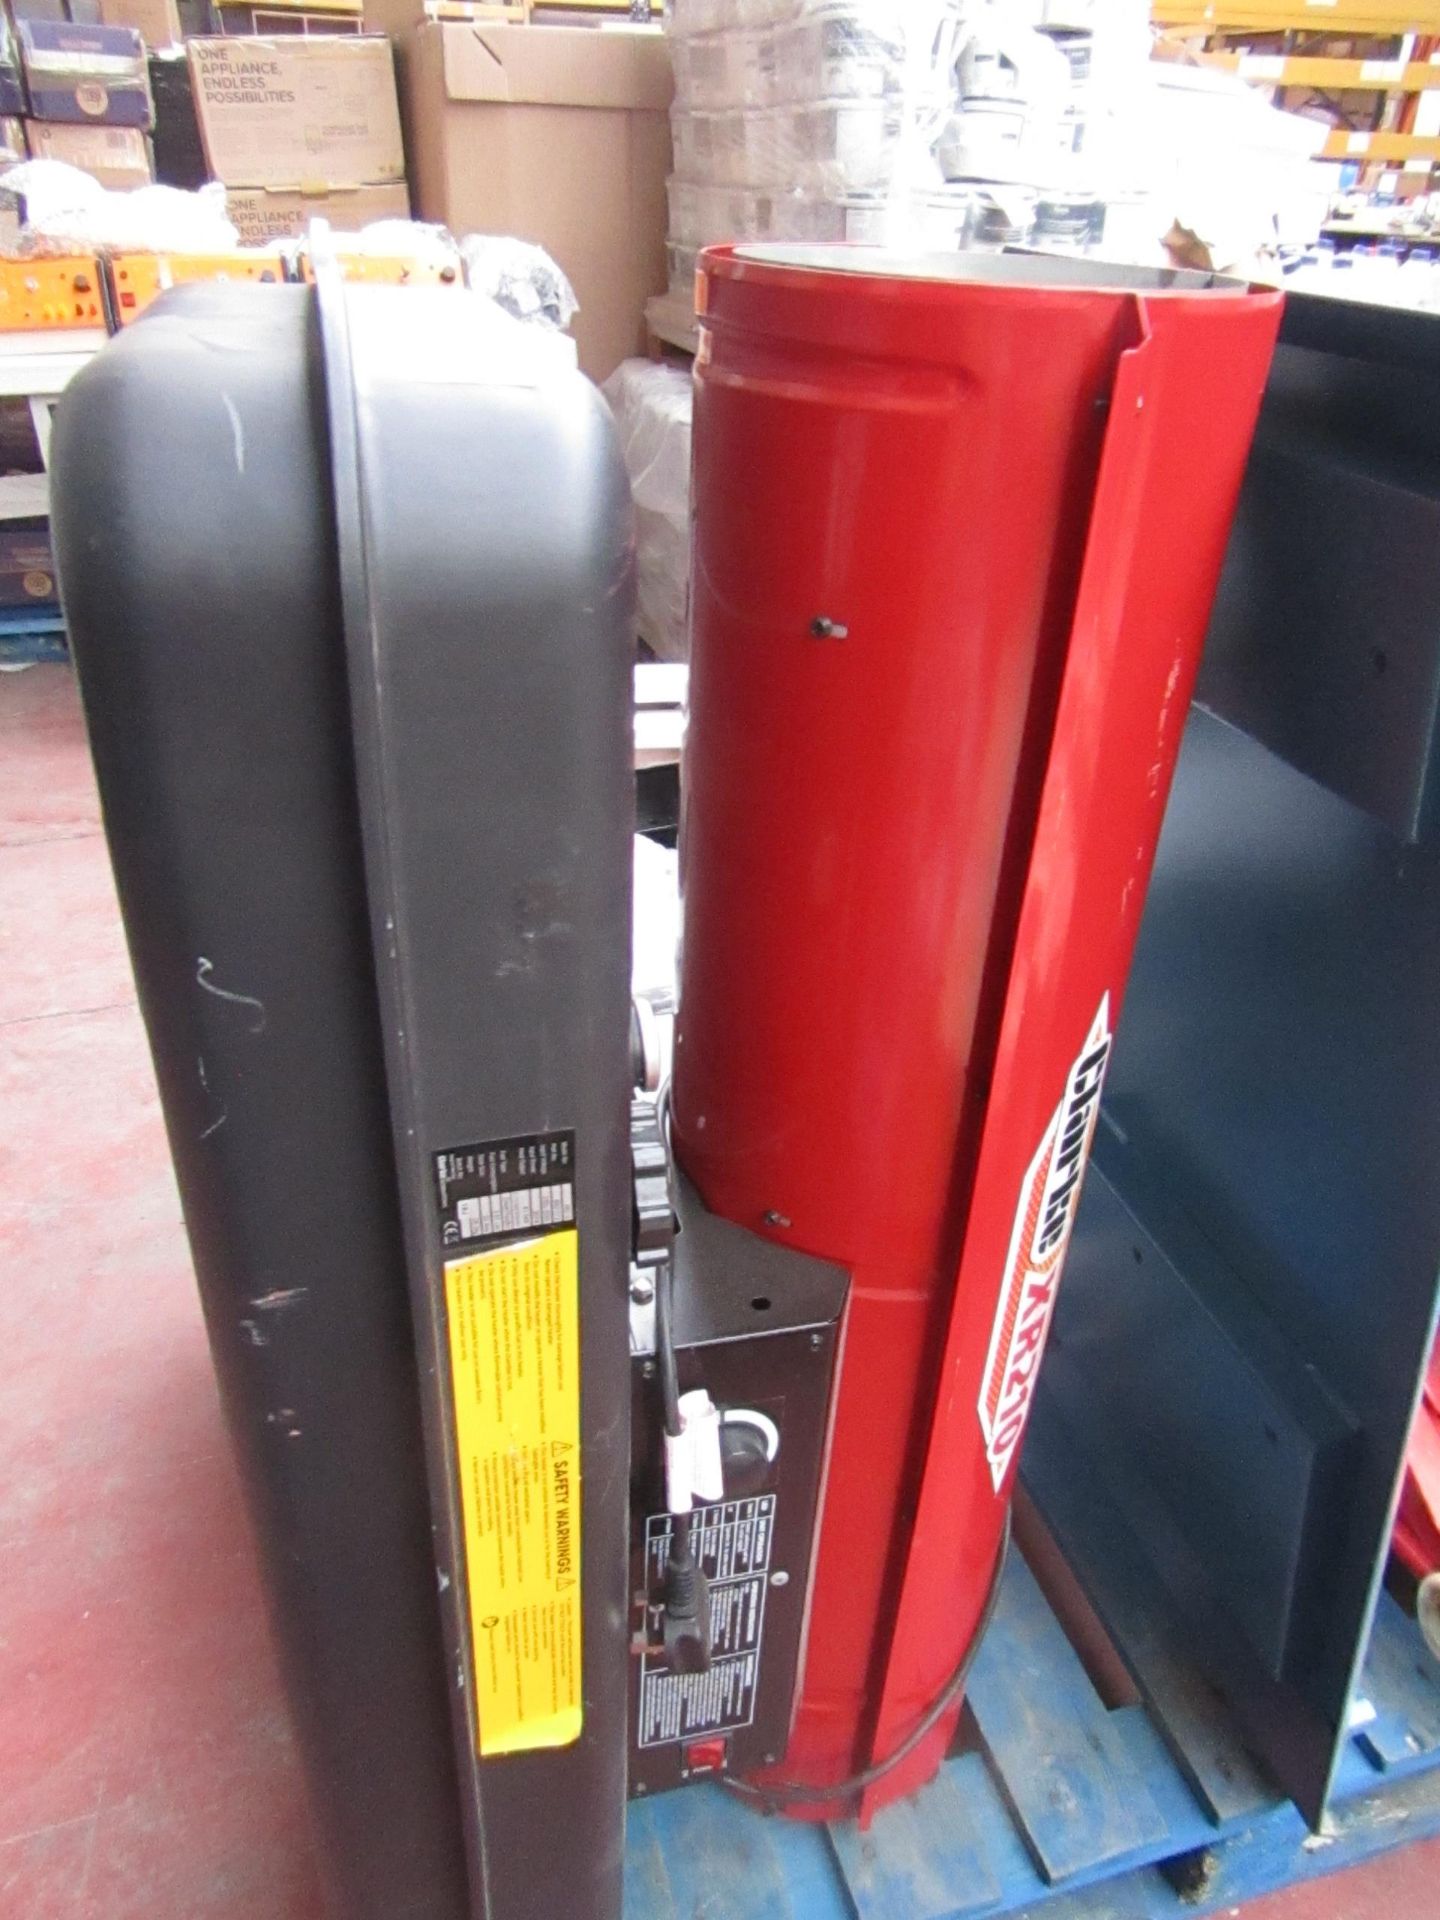 1x CL HEAT XR210 230V 6 687 This lot is a Machine Mart product which is raw and completely unchecked